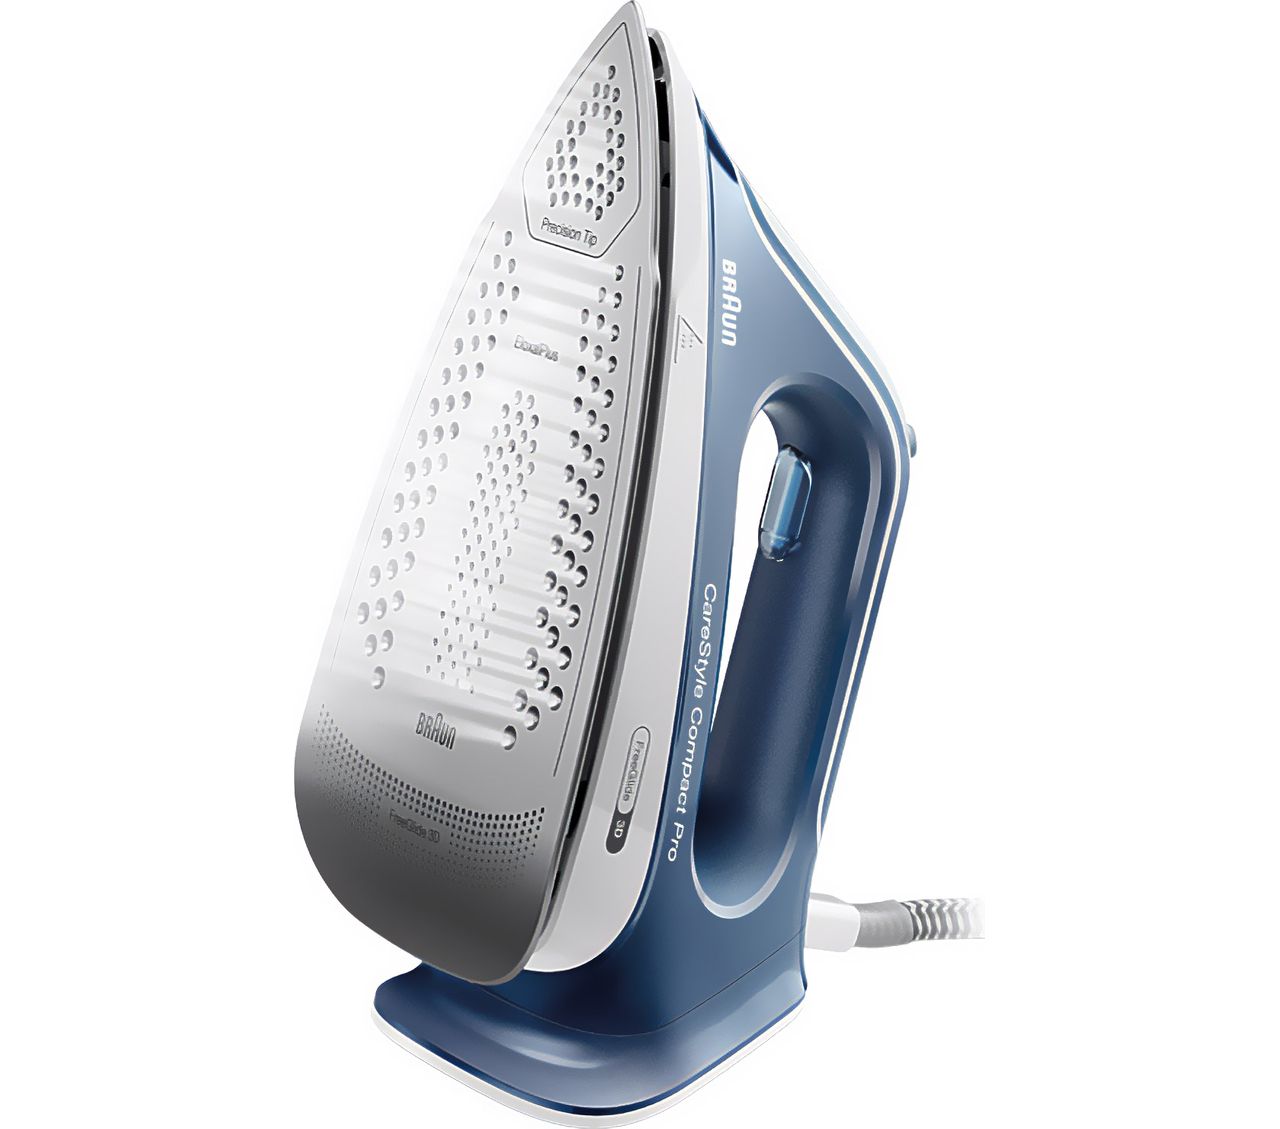 Portable and Lightweight Steam & Dry Iron - White